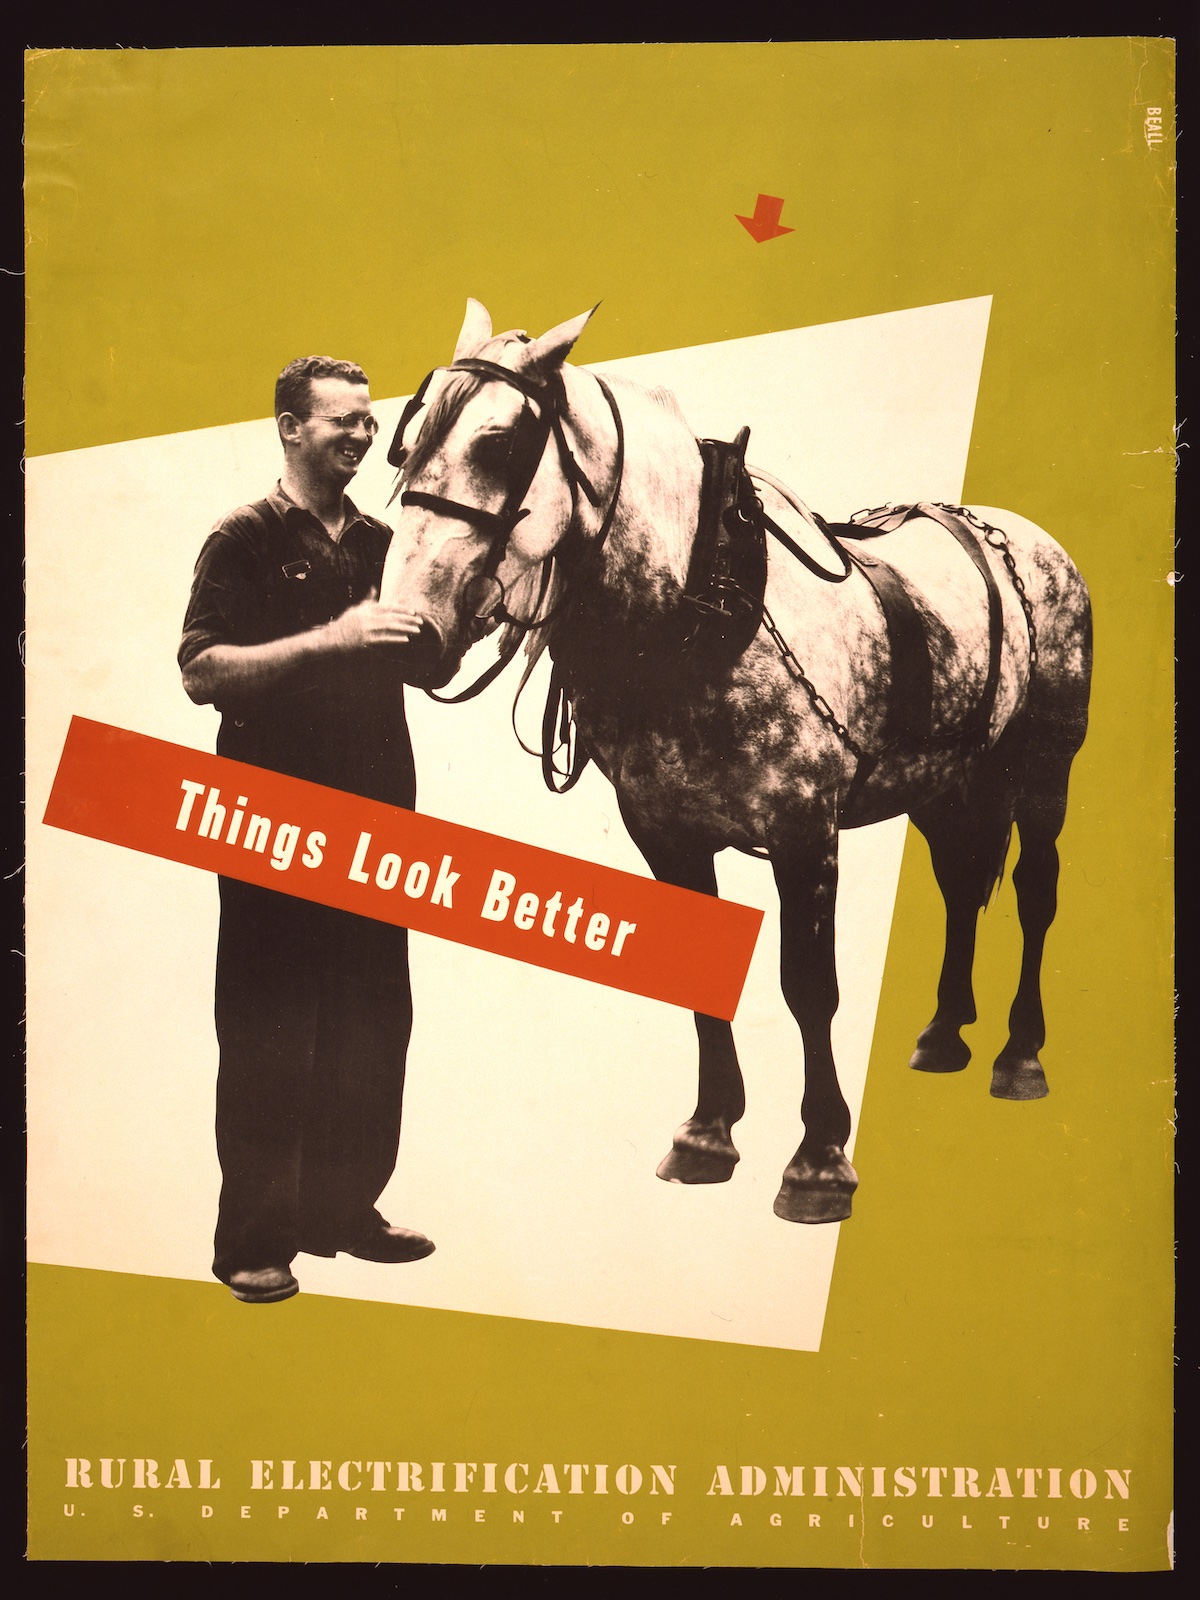 'Things look better' Rural Electrification poster by Lester Beall - 1930